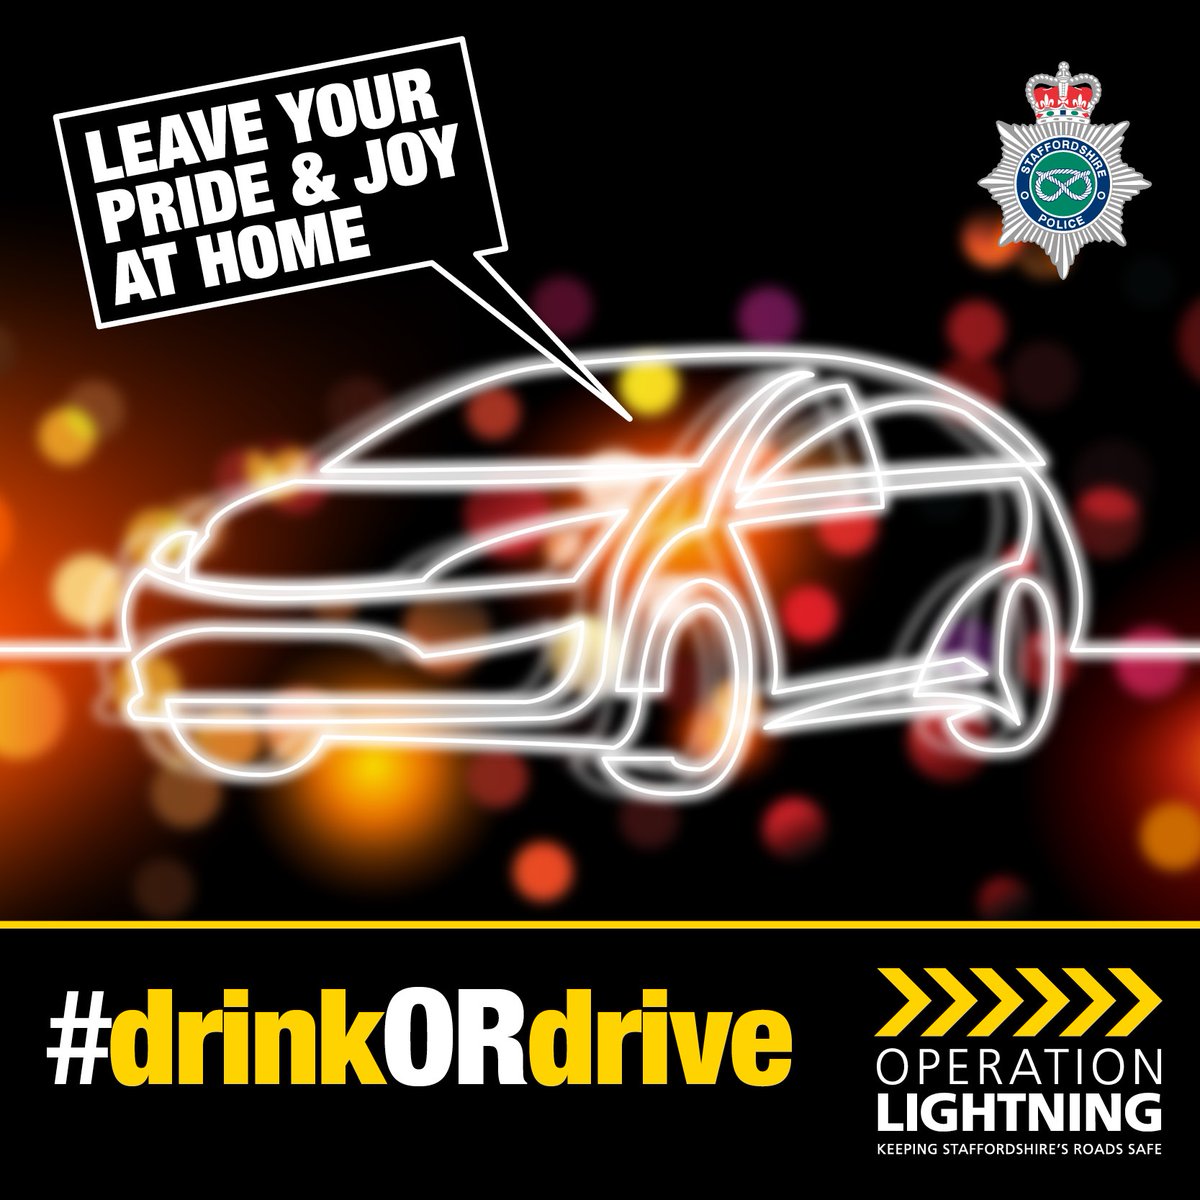 In the last 3 years, Stafford has had 2 fatalities and 42 injuries due to collisions involving a drink/drug driver. Make your choice. #drinkORdrive